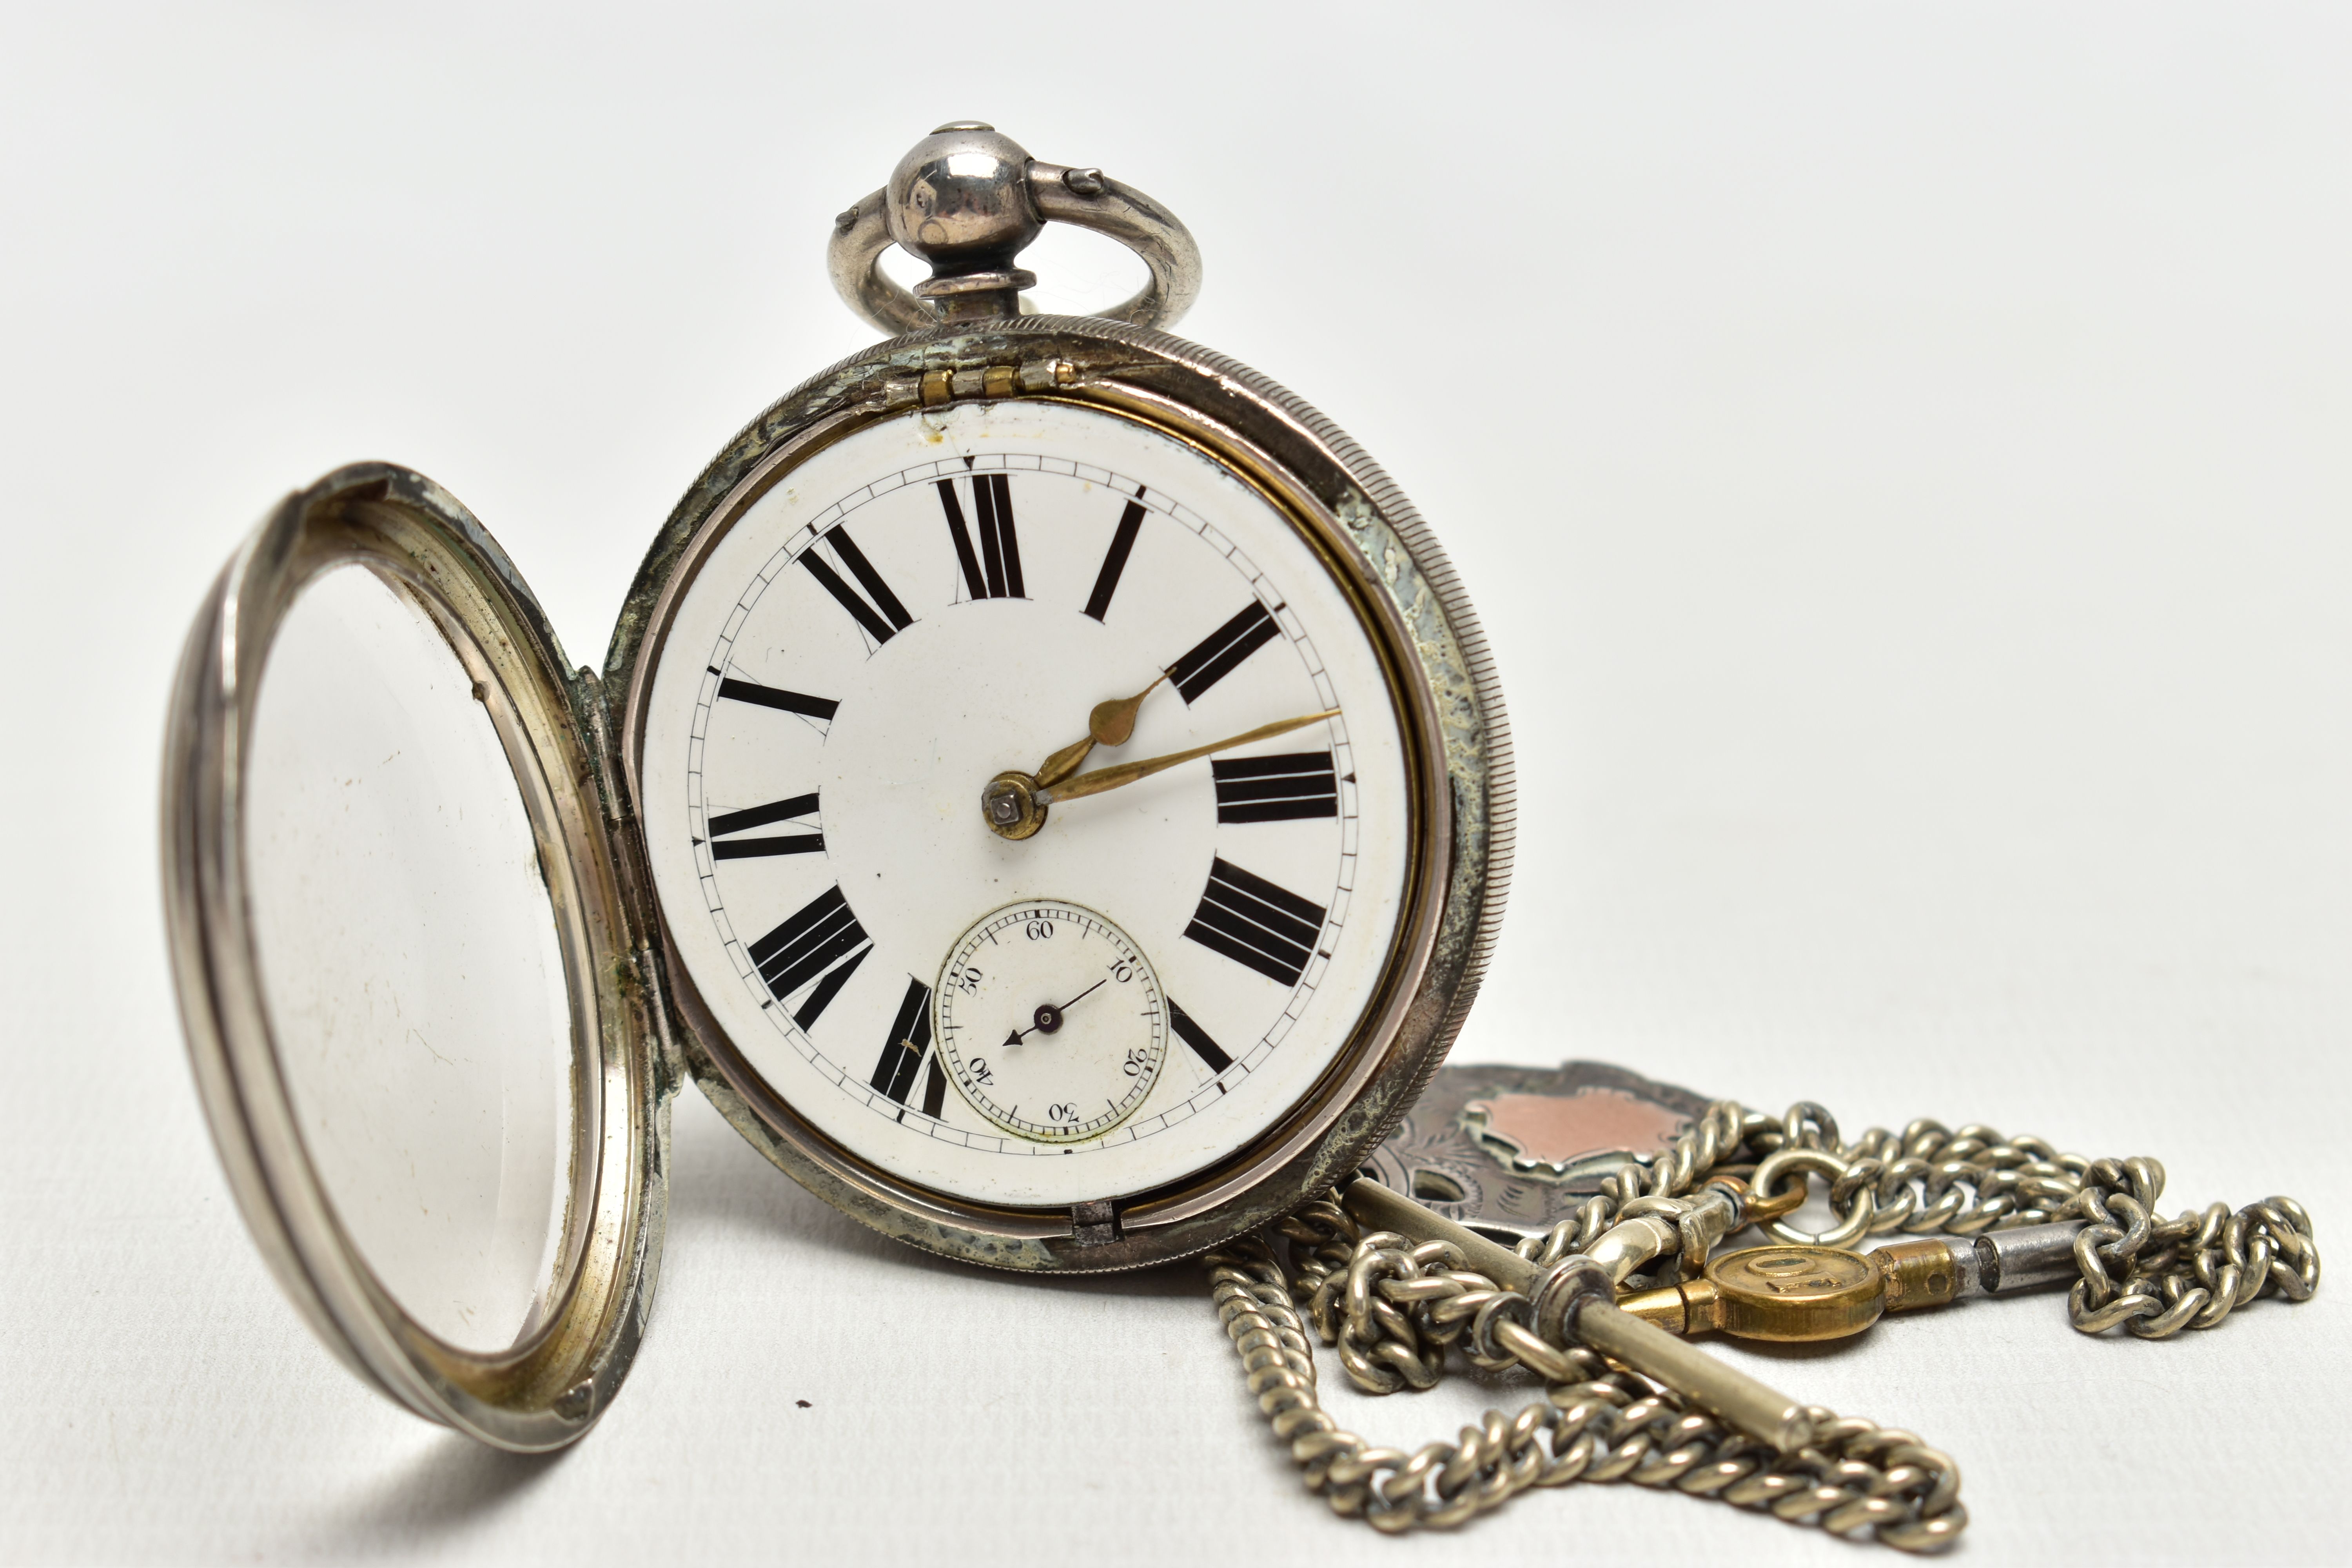 A SILVER OPEN FACE POCKET WATCH WITH ALBERT CHAIN AND FOB, key wound pocket watch featuring a - Image 3 of 5